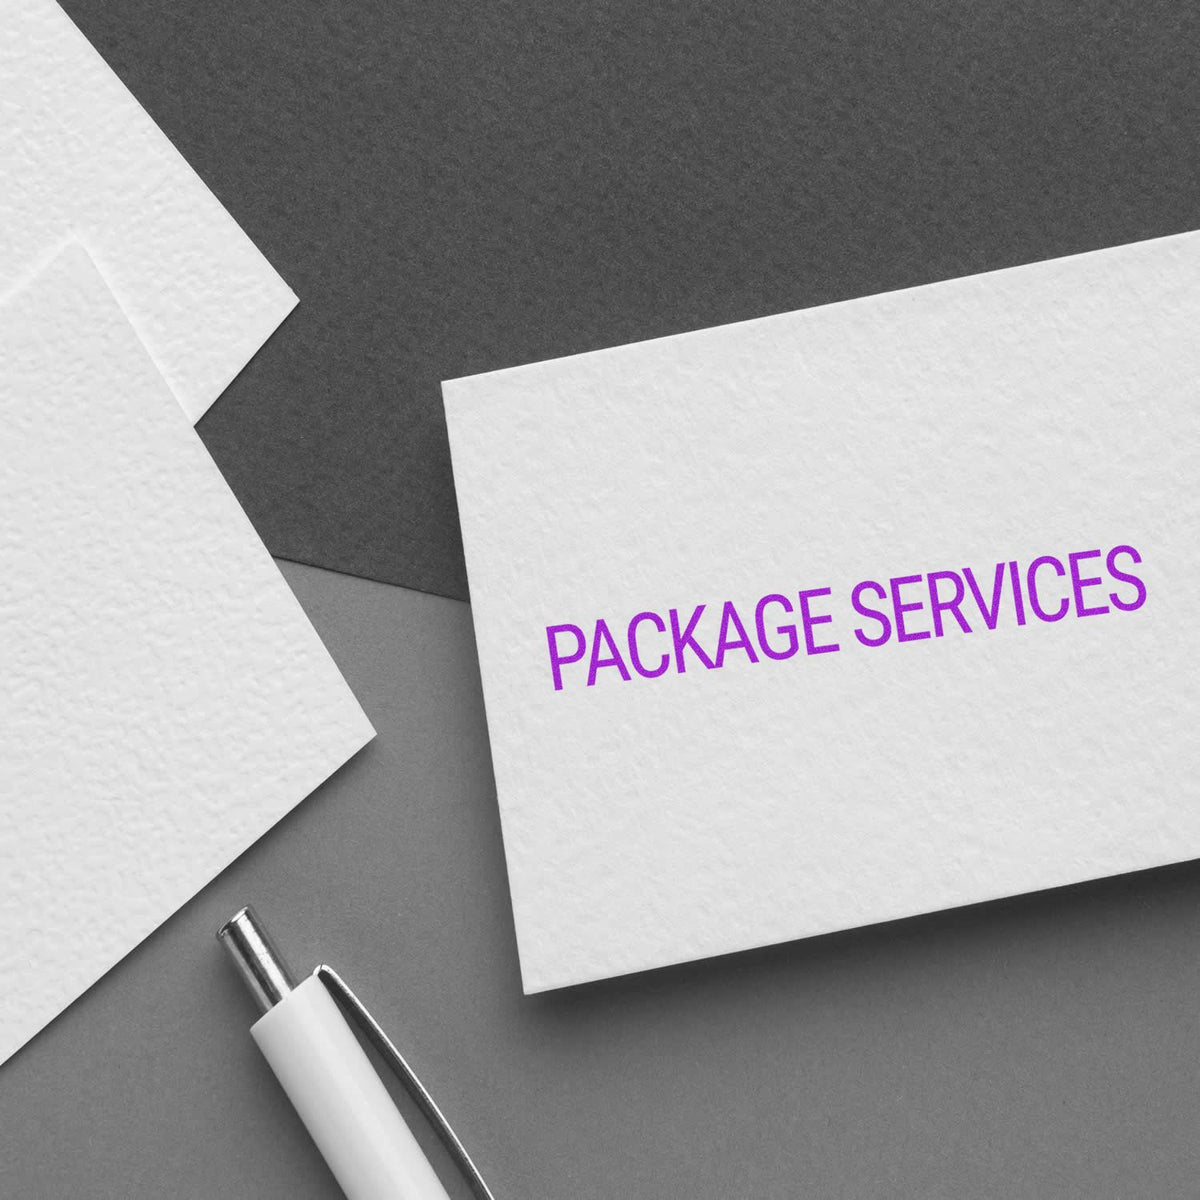 Large Package Services Rubber Stamp In Use